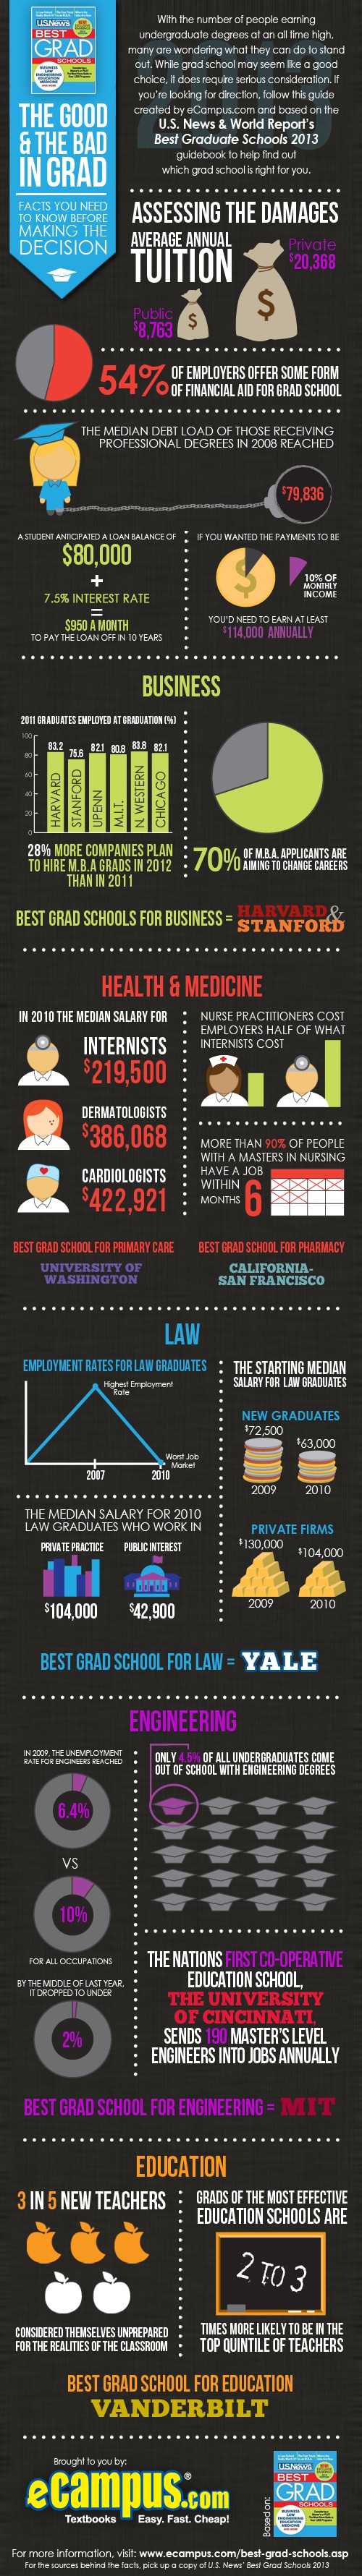 The Good and the Bad in Grad (Infographic)